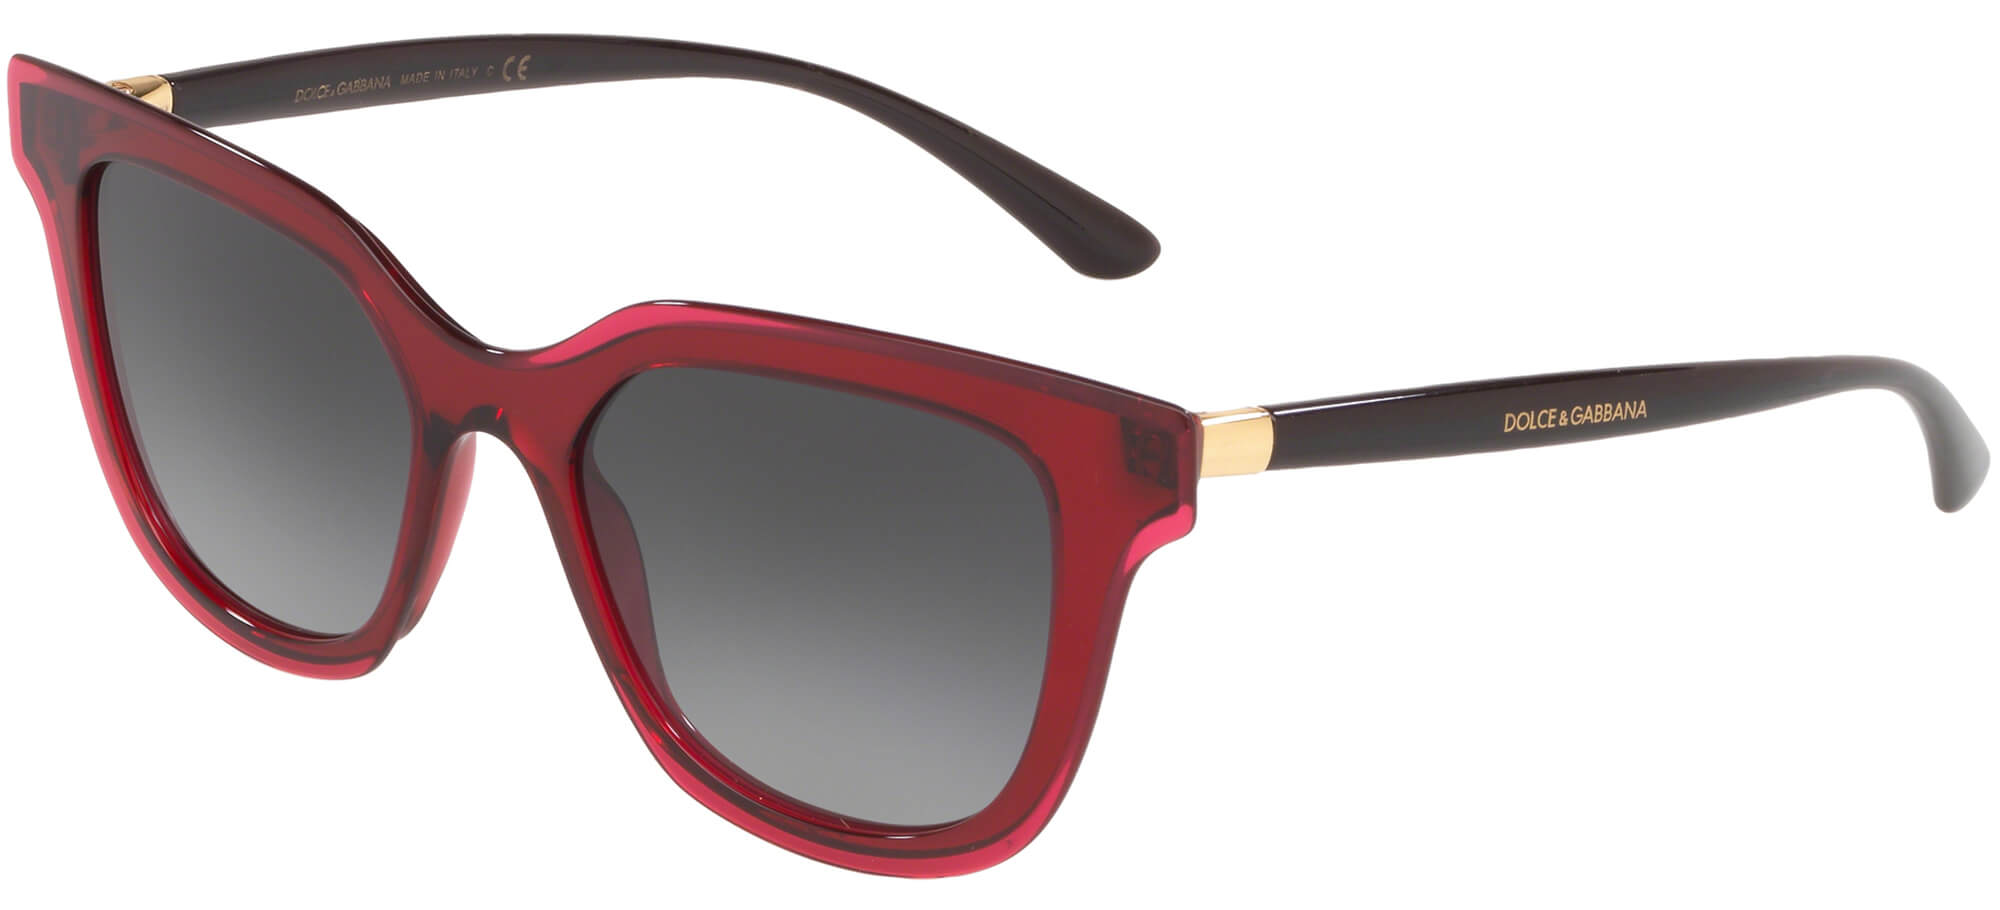 Dolce & GabbanaDOUBLE LINE DG 4362Red/grey Shaded (3211/8G)